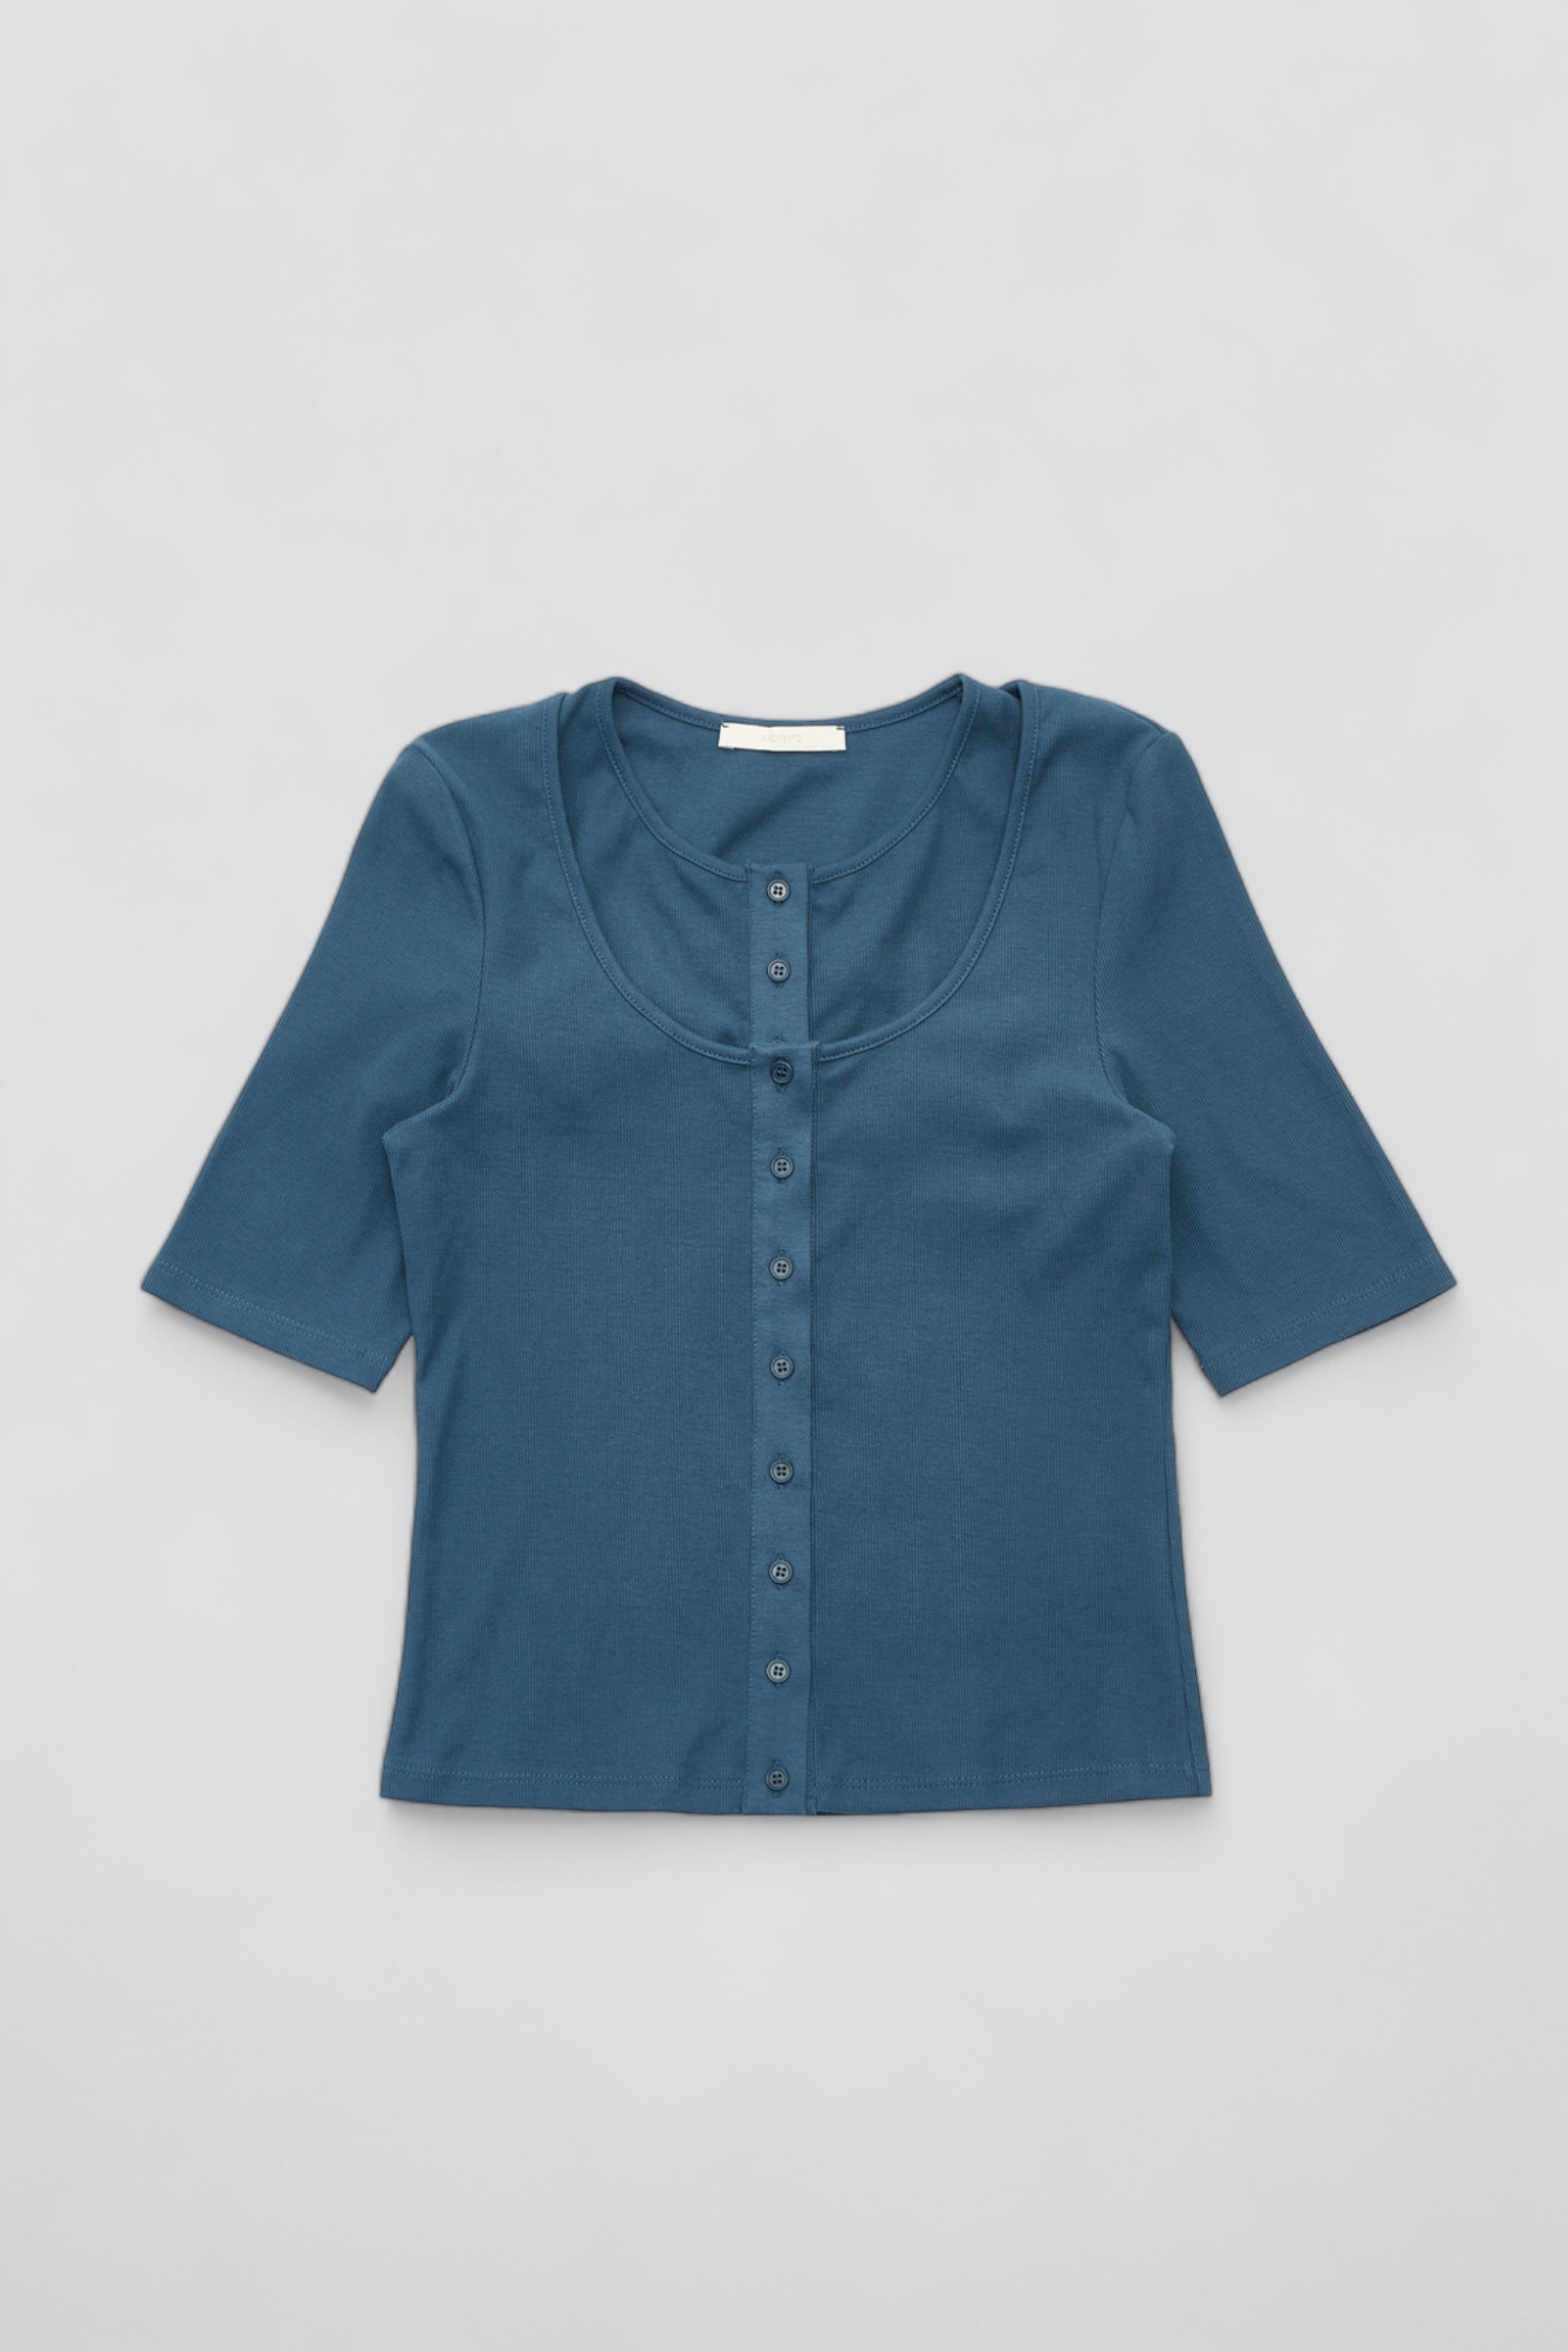 Blue Ribbed Button Cardigan Top